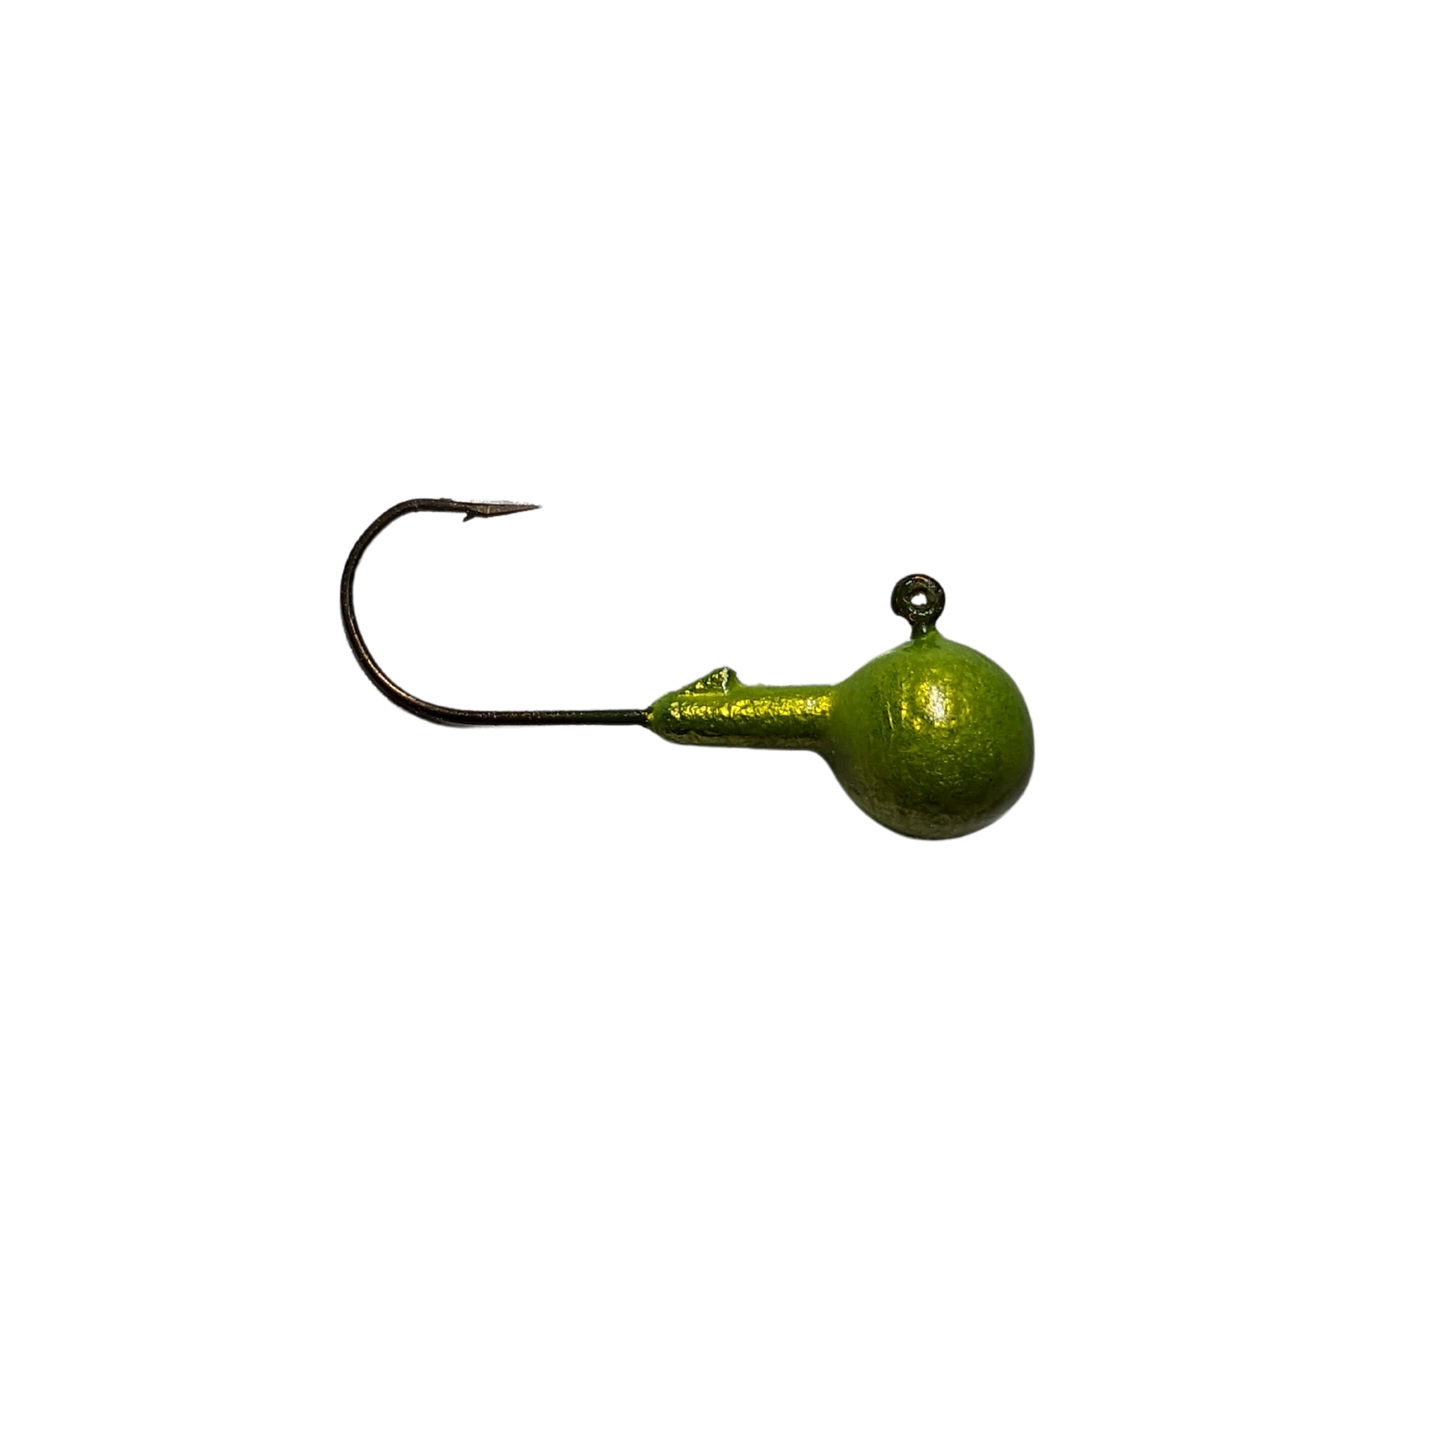 Lead-Free Round Jig Head green glow color 1/2 3/8